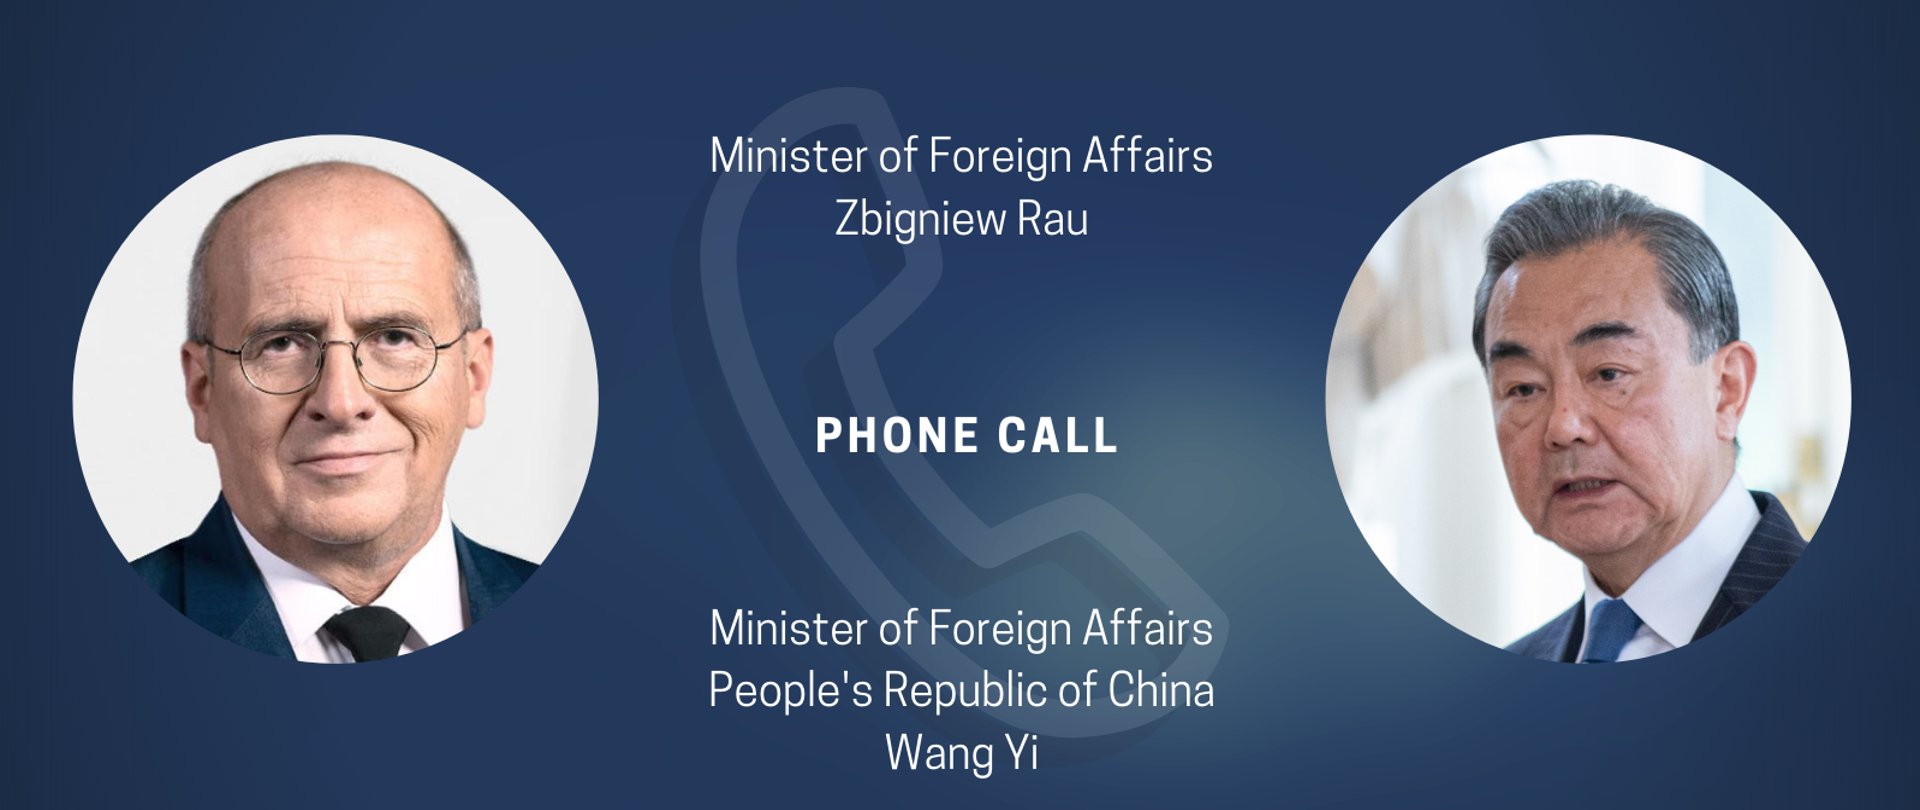 Minister Zbigniew Rau holds telephone call with Minister of Foreign Affairs of the People’s Republic of China Wang Yi